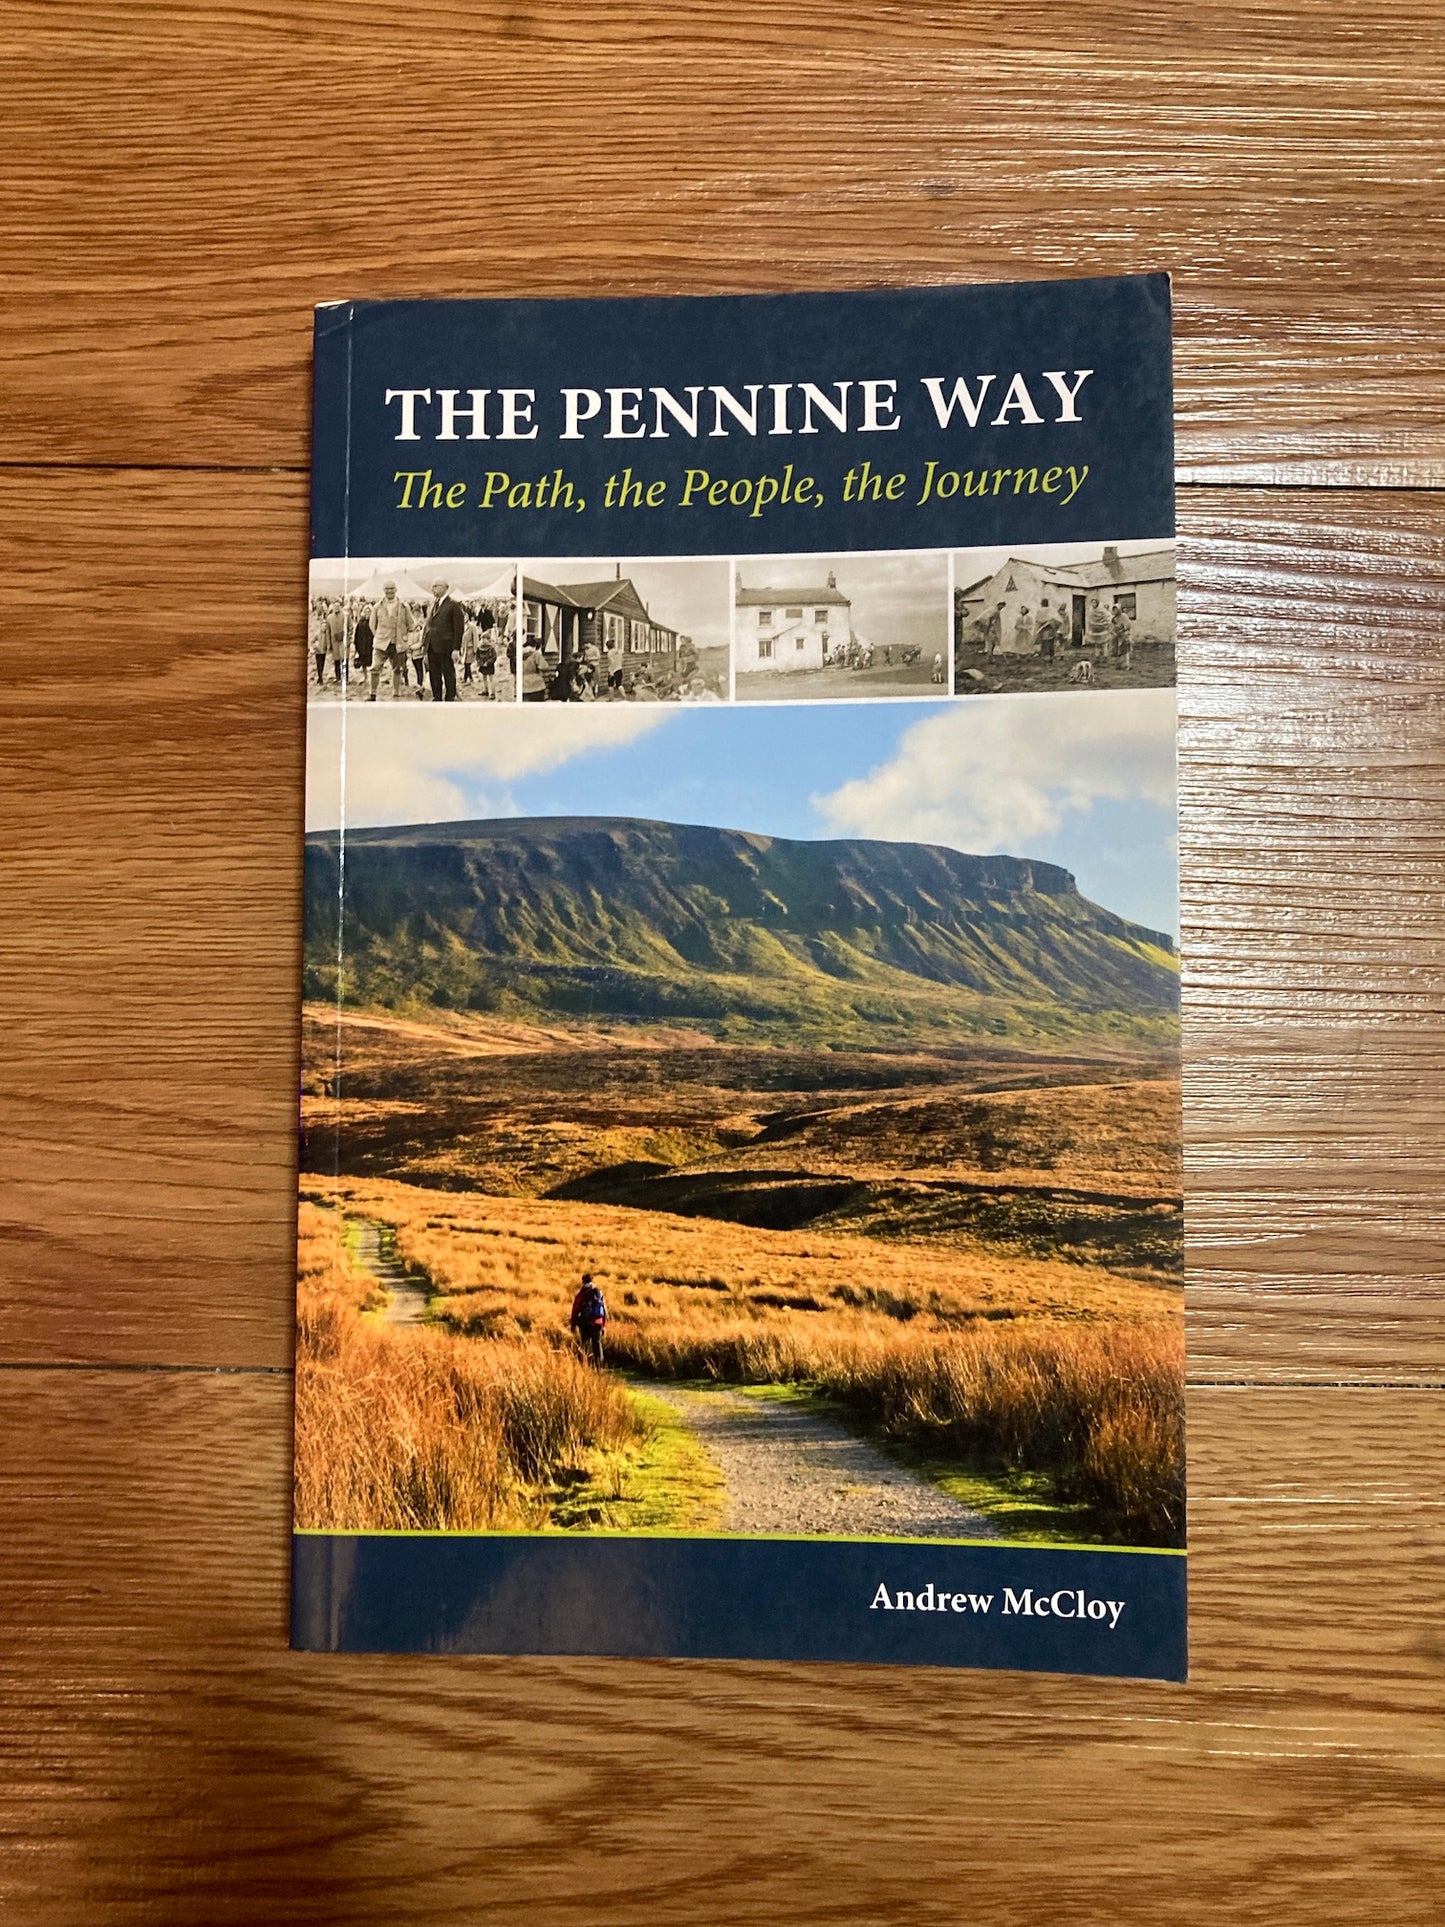 The Pennine Way: The Path, the People, the Journey (Cicerone)